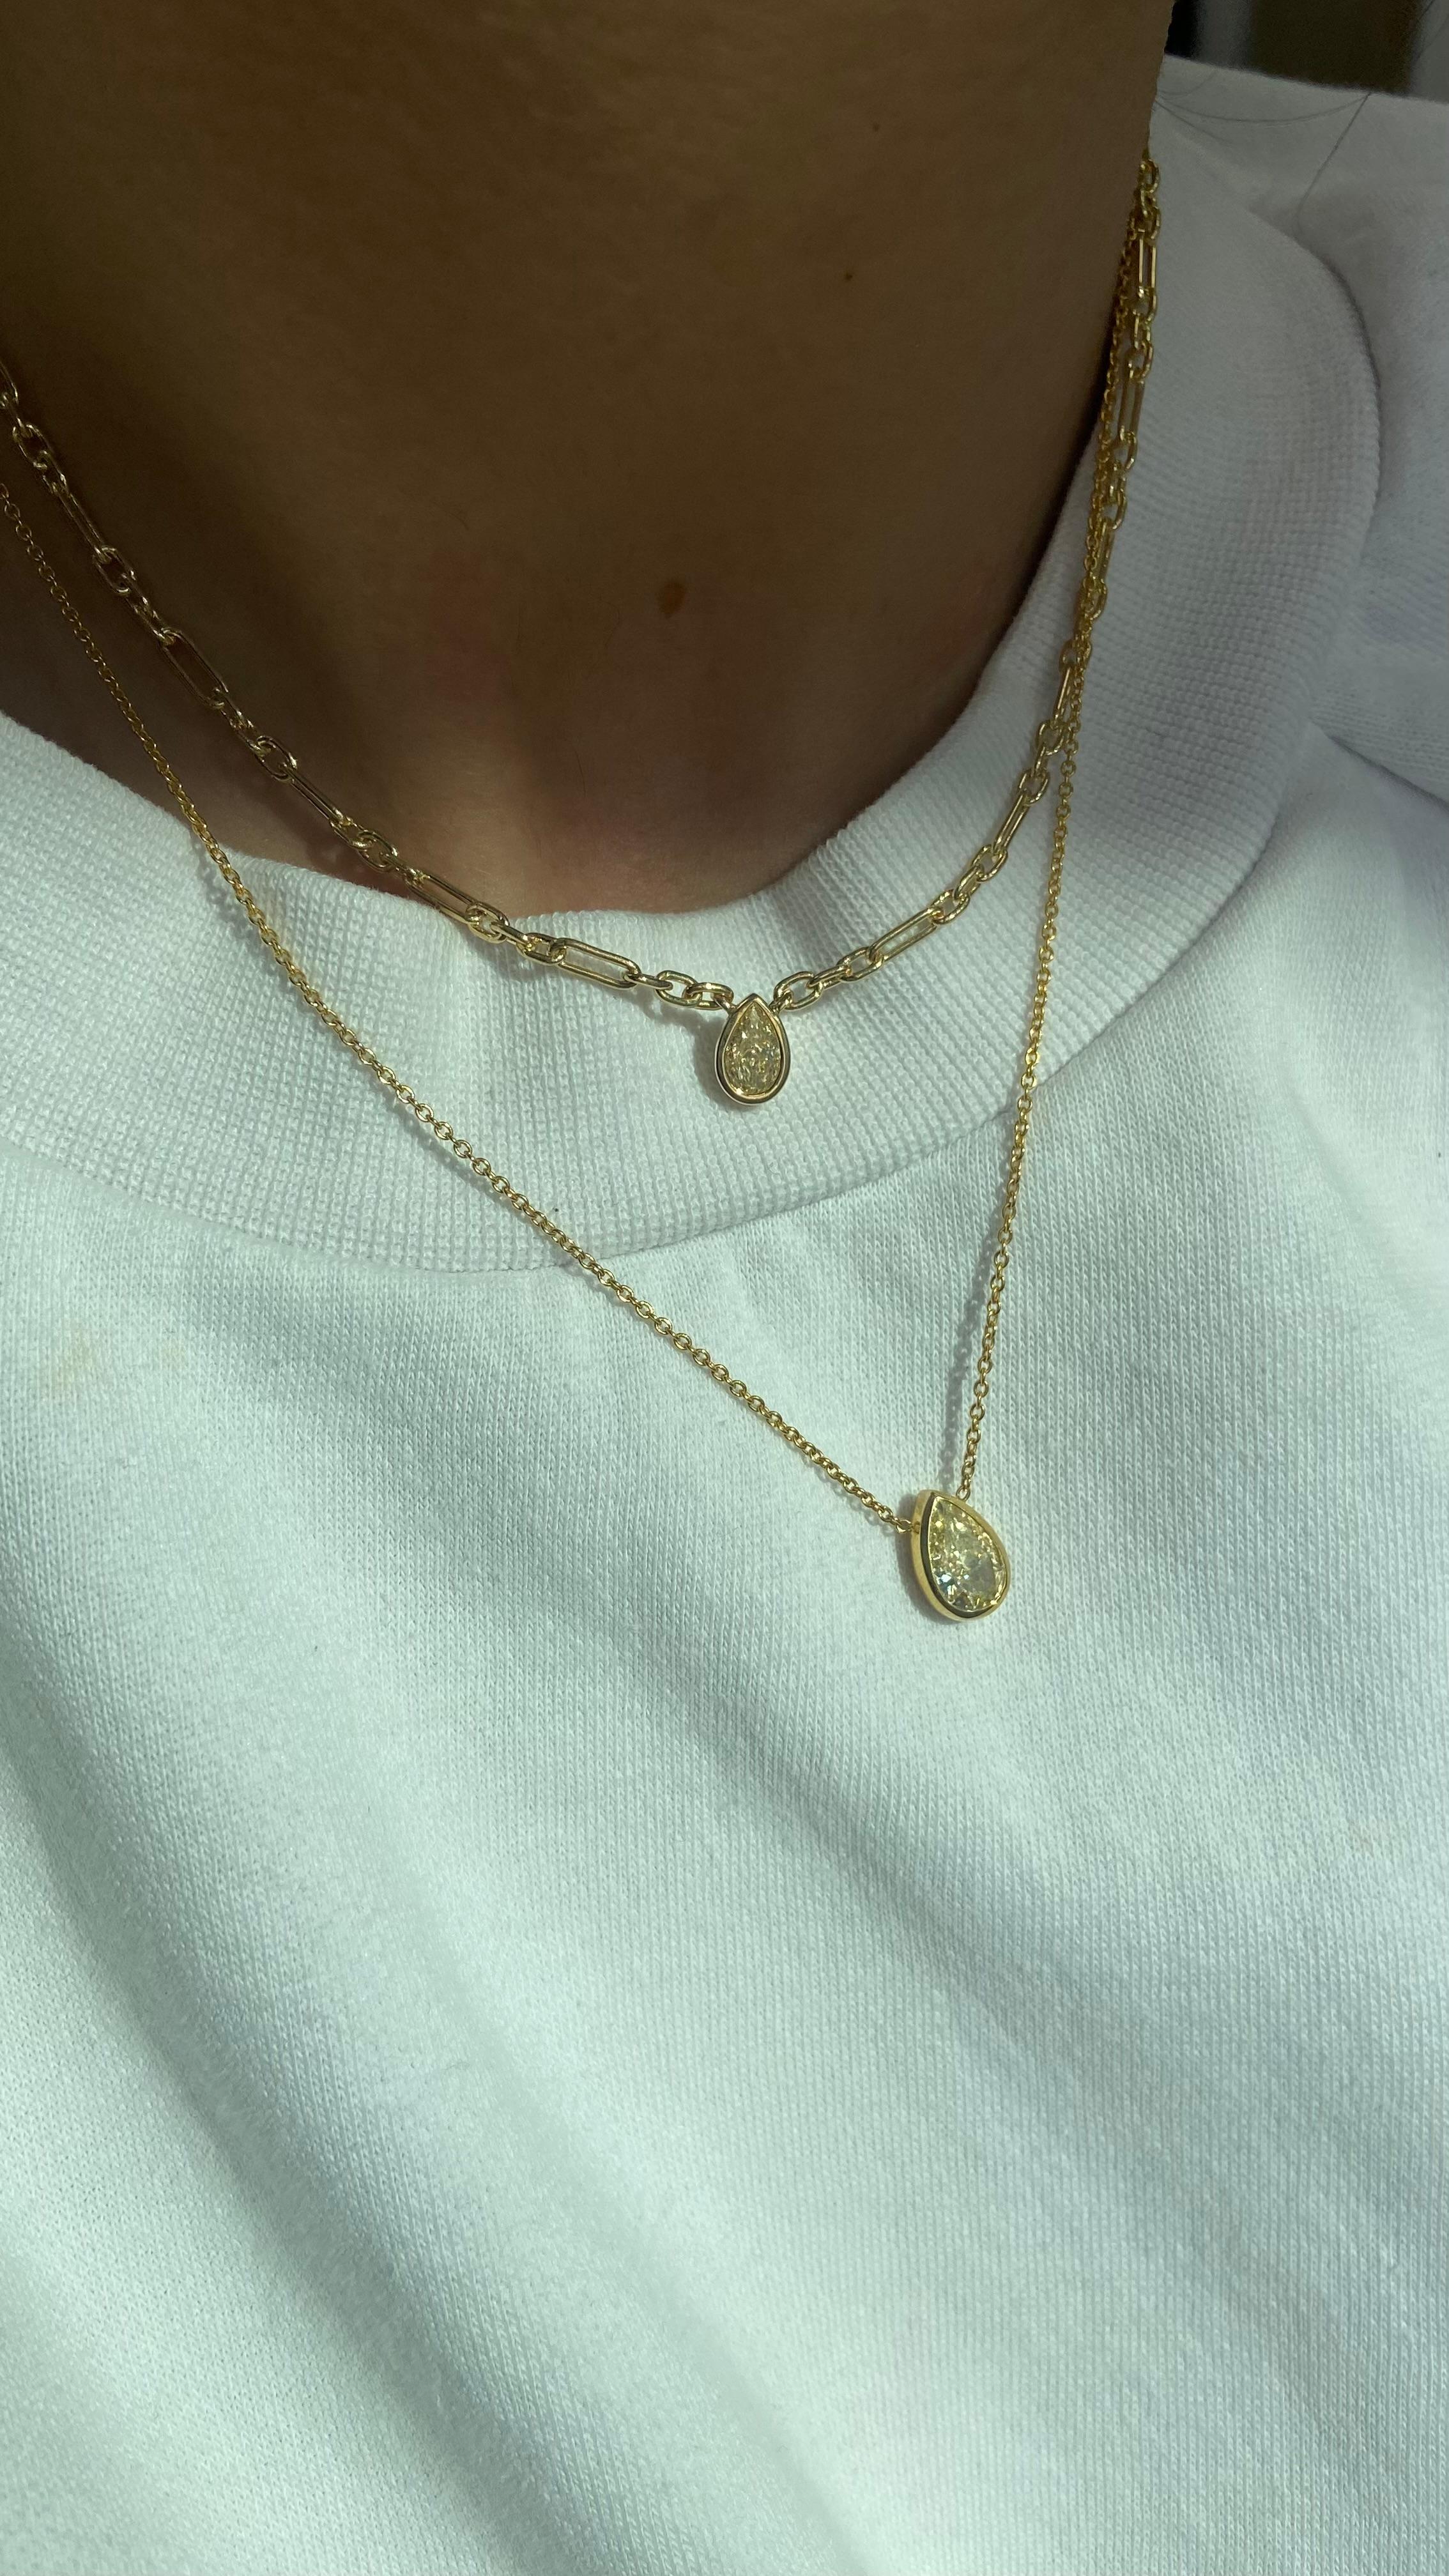 0.70 Carat 
Pear Shape Diamond
Light Yellow
VS+ Clarity 
18k Yellow Solid Gold Chain
16 Inches
Gold Bezel Setting
Handmade in NYC 

This piece can be viewed before purchase in our showroom in NYC, or at one of our retail partners throughout the